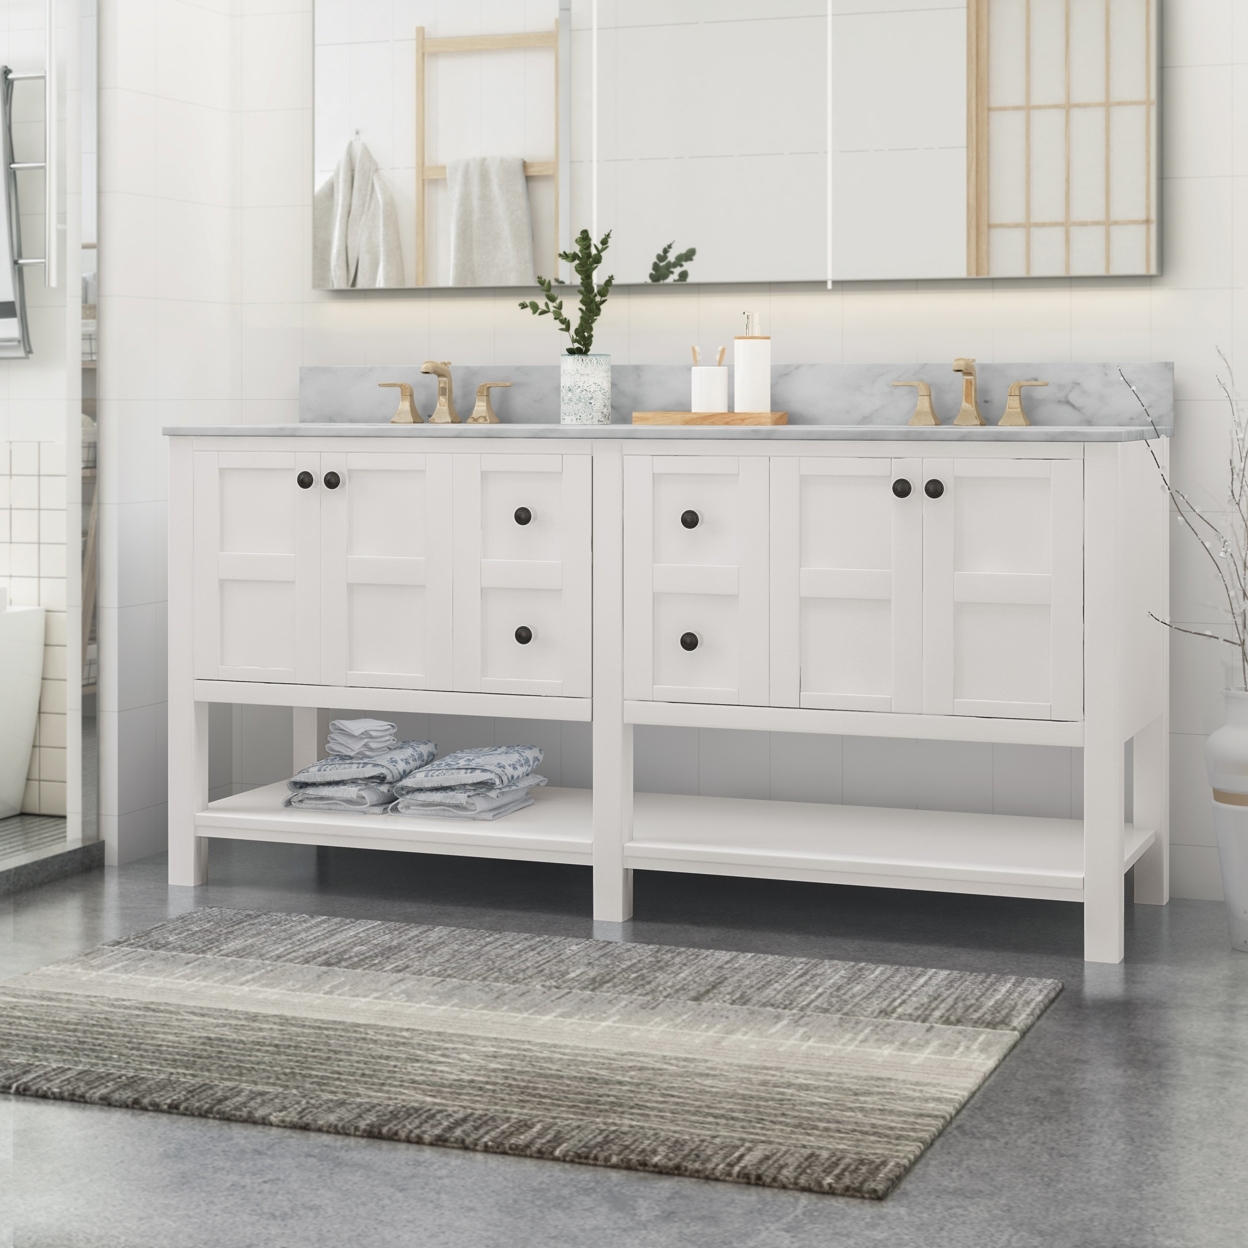 Jamison Contemporary 72 Wood Double Sink Bathroom Vanity With Marble Counter Top With Carrara White Marble - White